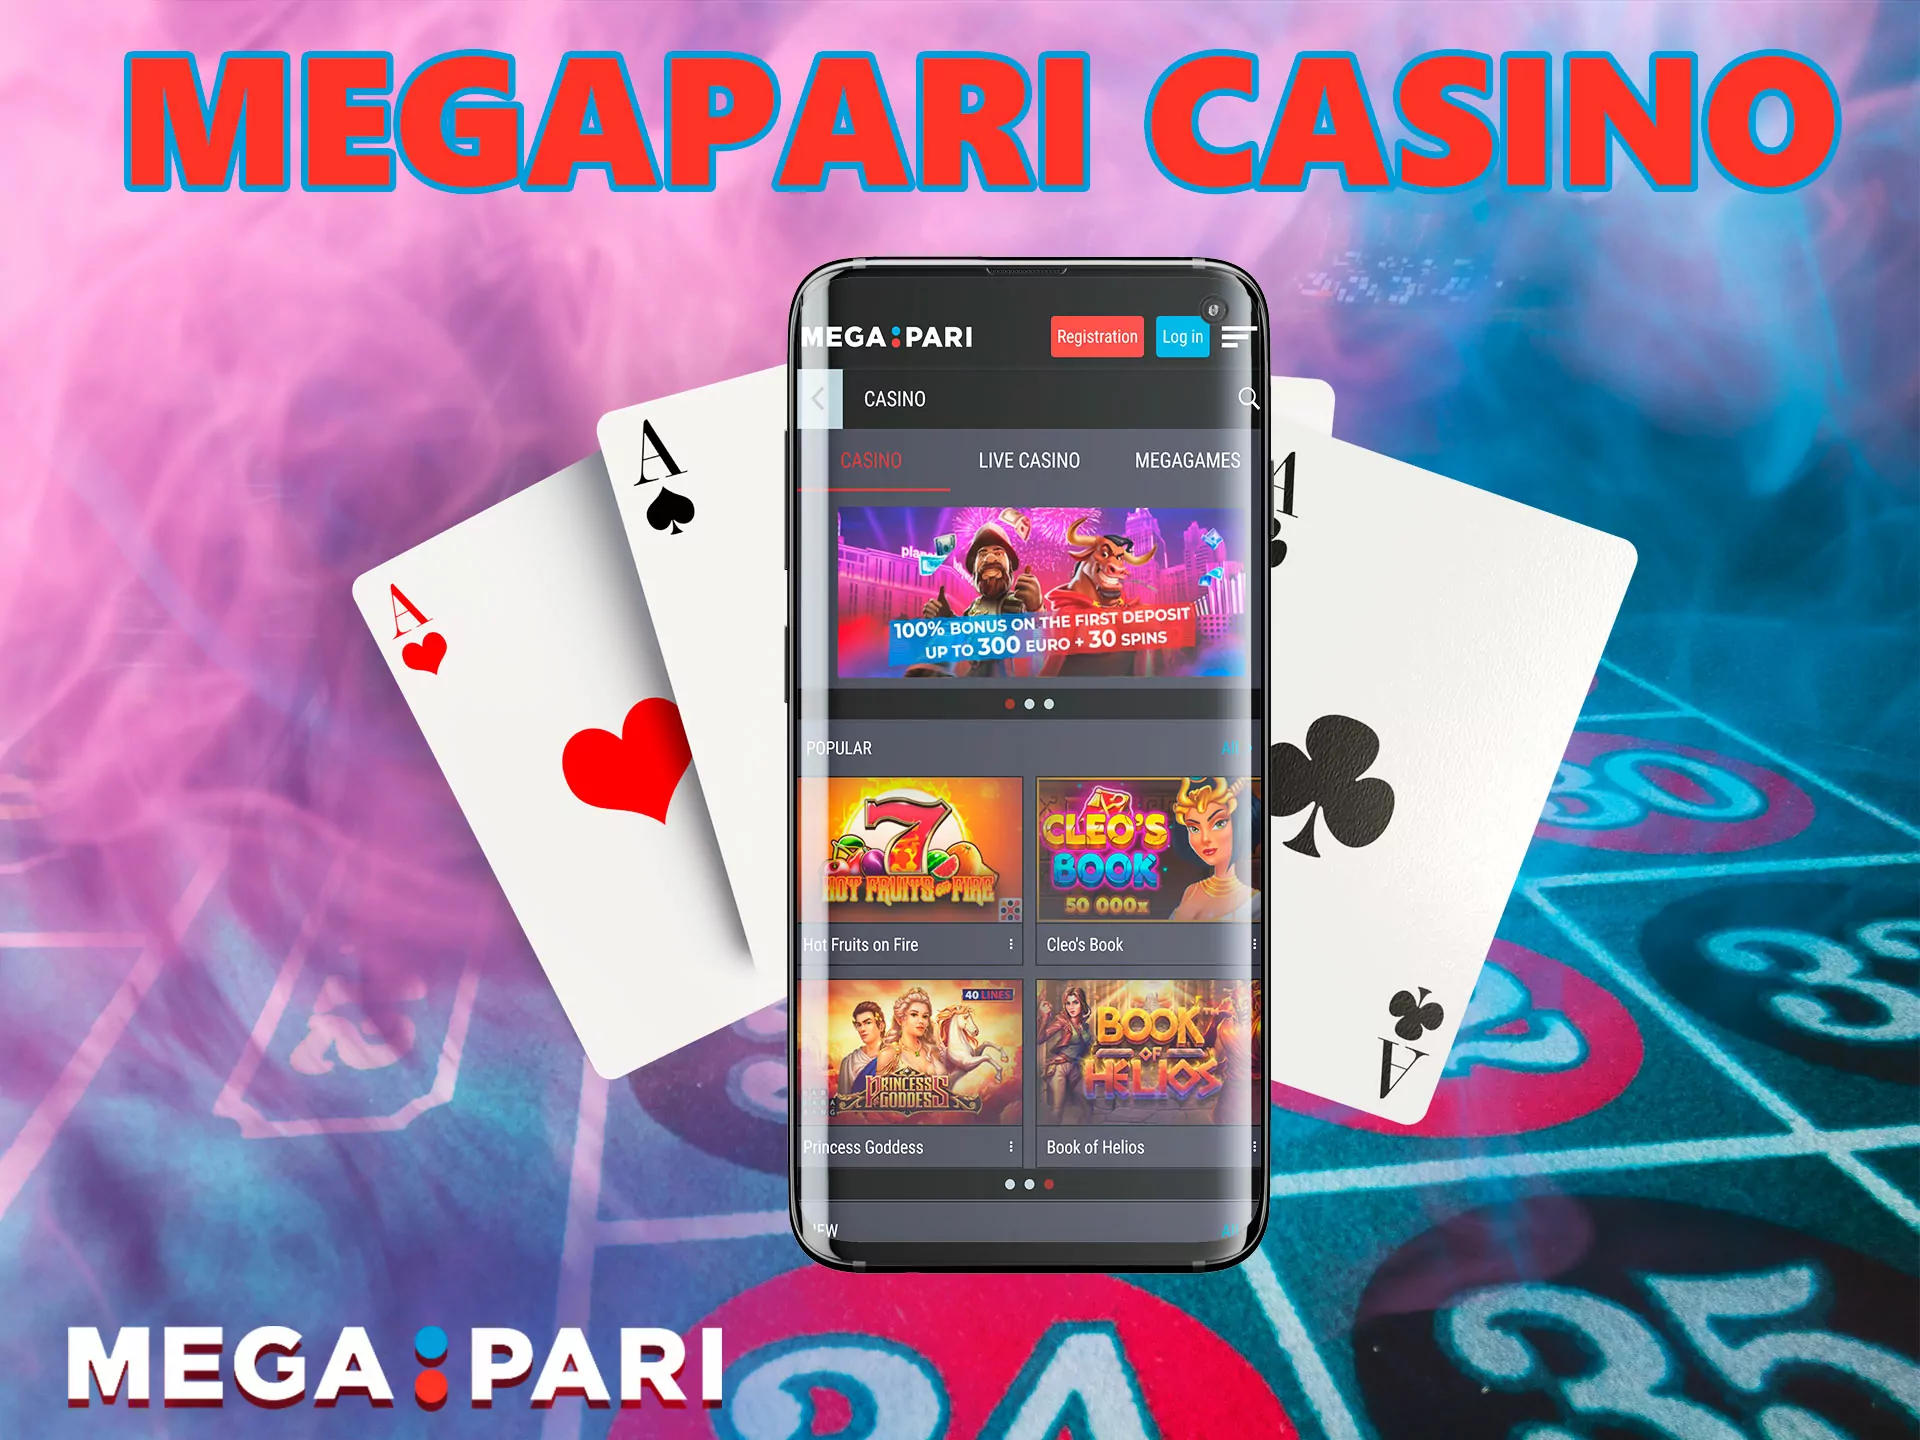 Here everyone will find many different games for themselves, roulette, bingo, baccarat, poker and much more awaits you in this category, you can find it in the profile header.